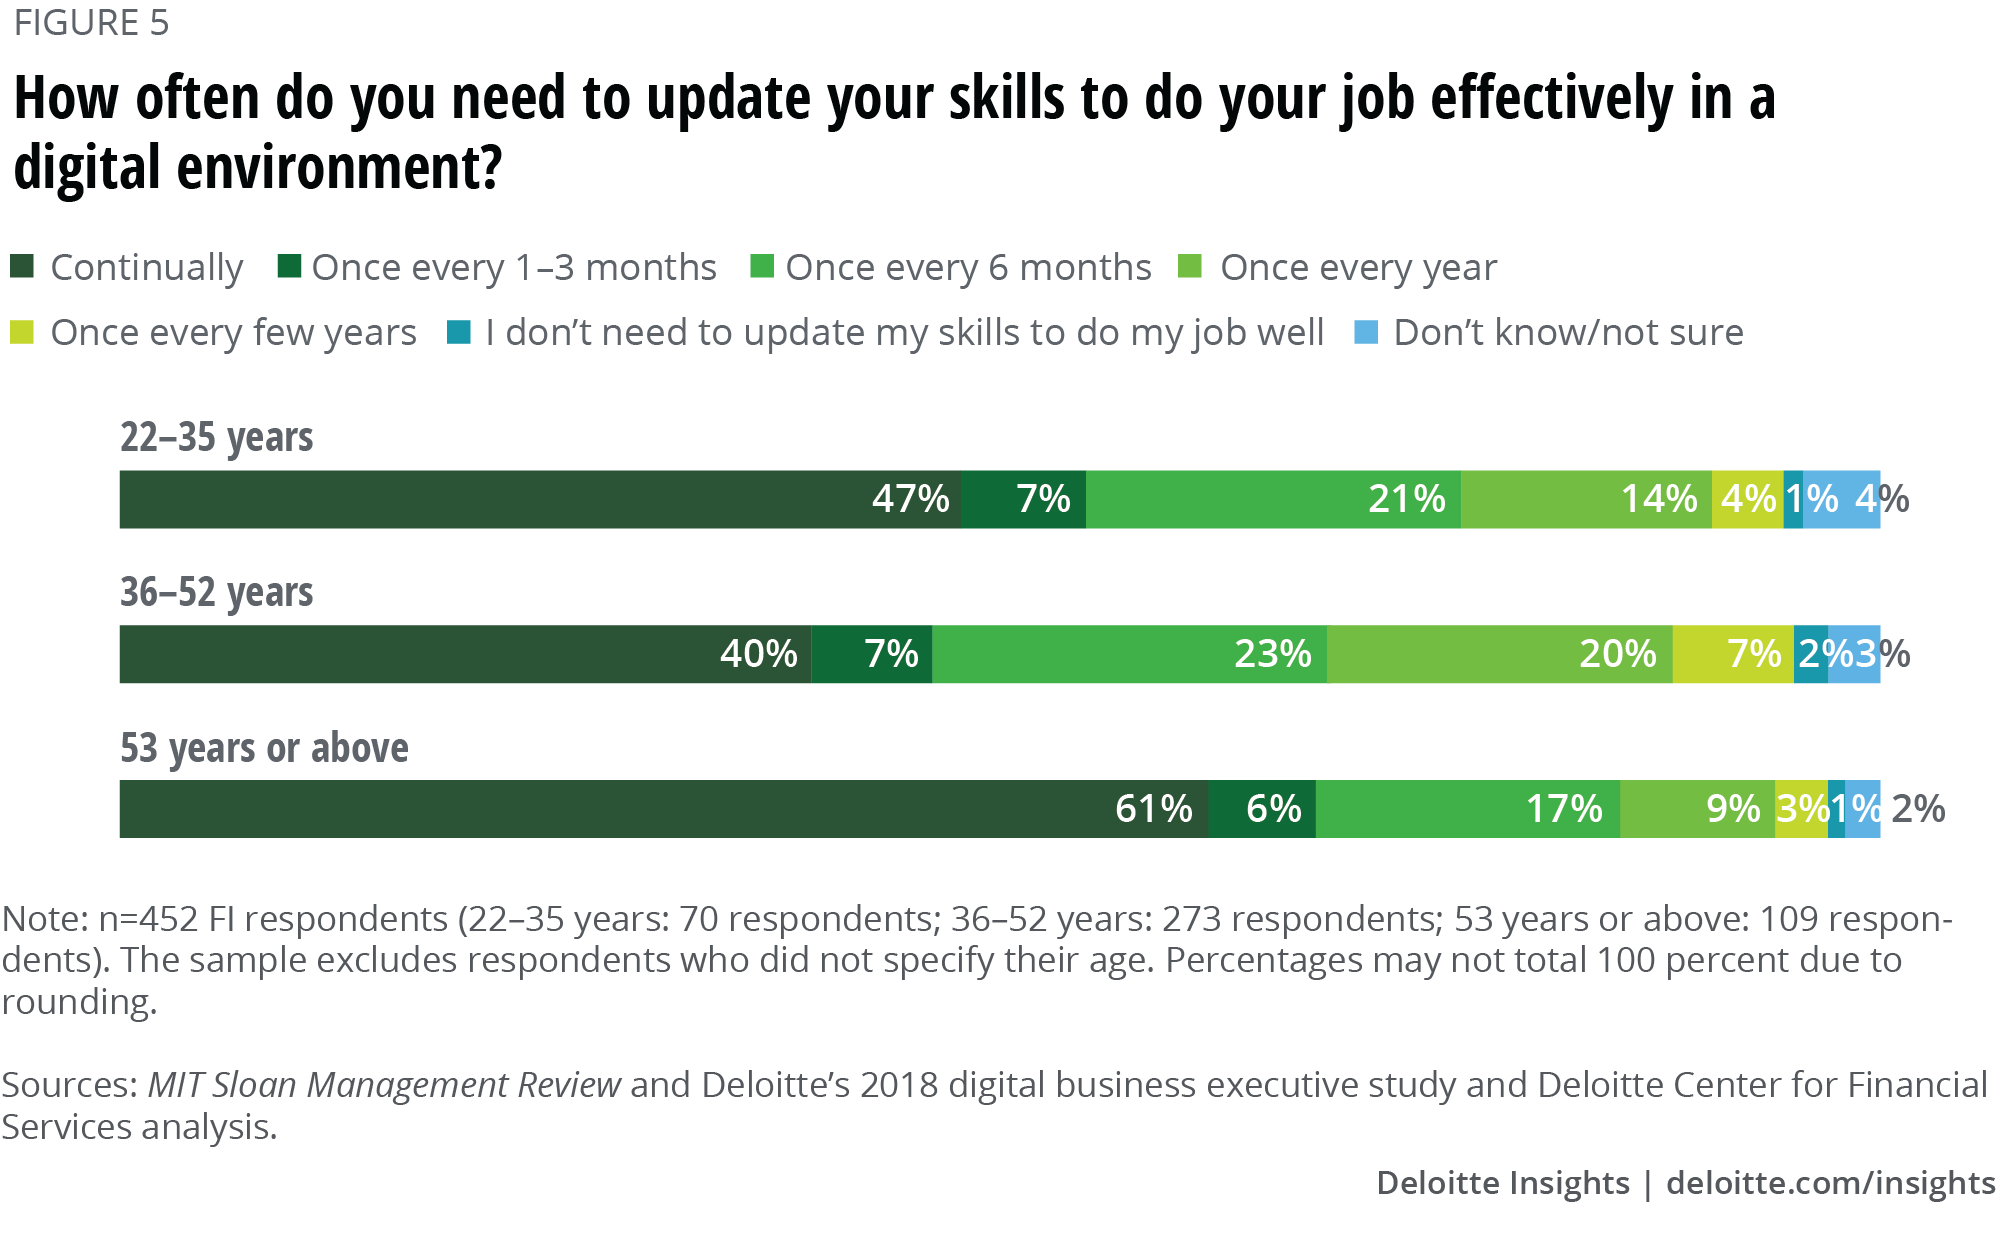 How often do you need to update your skills to do your job effectively in a digital environment?